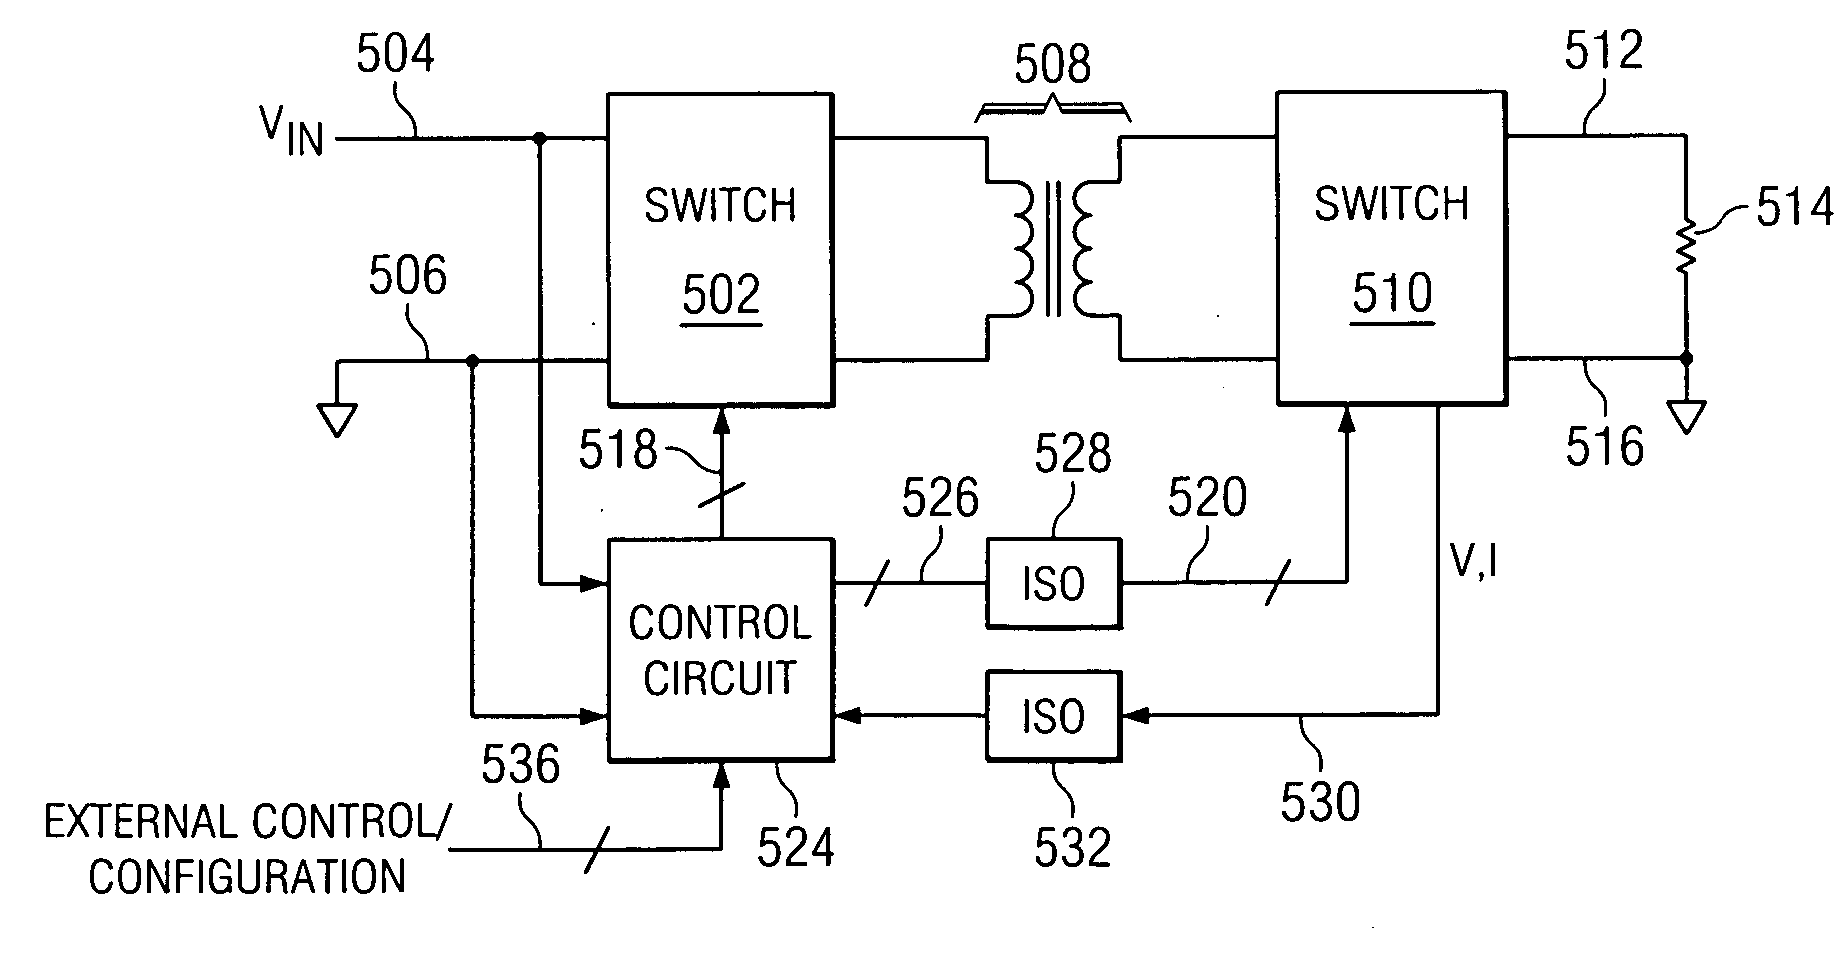 RF isolator for isolating voltage sensing and gate drivers